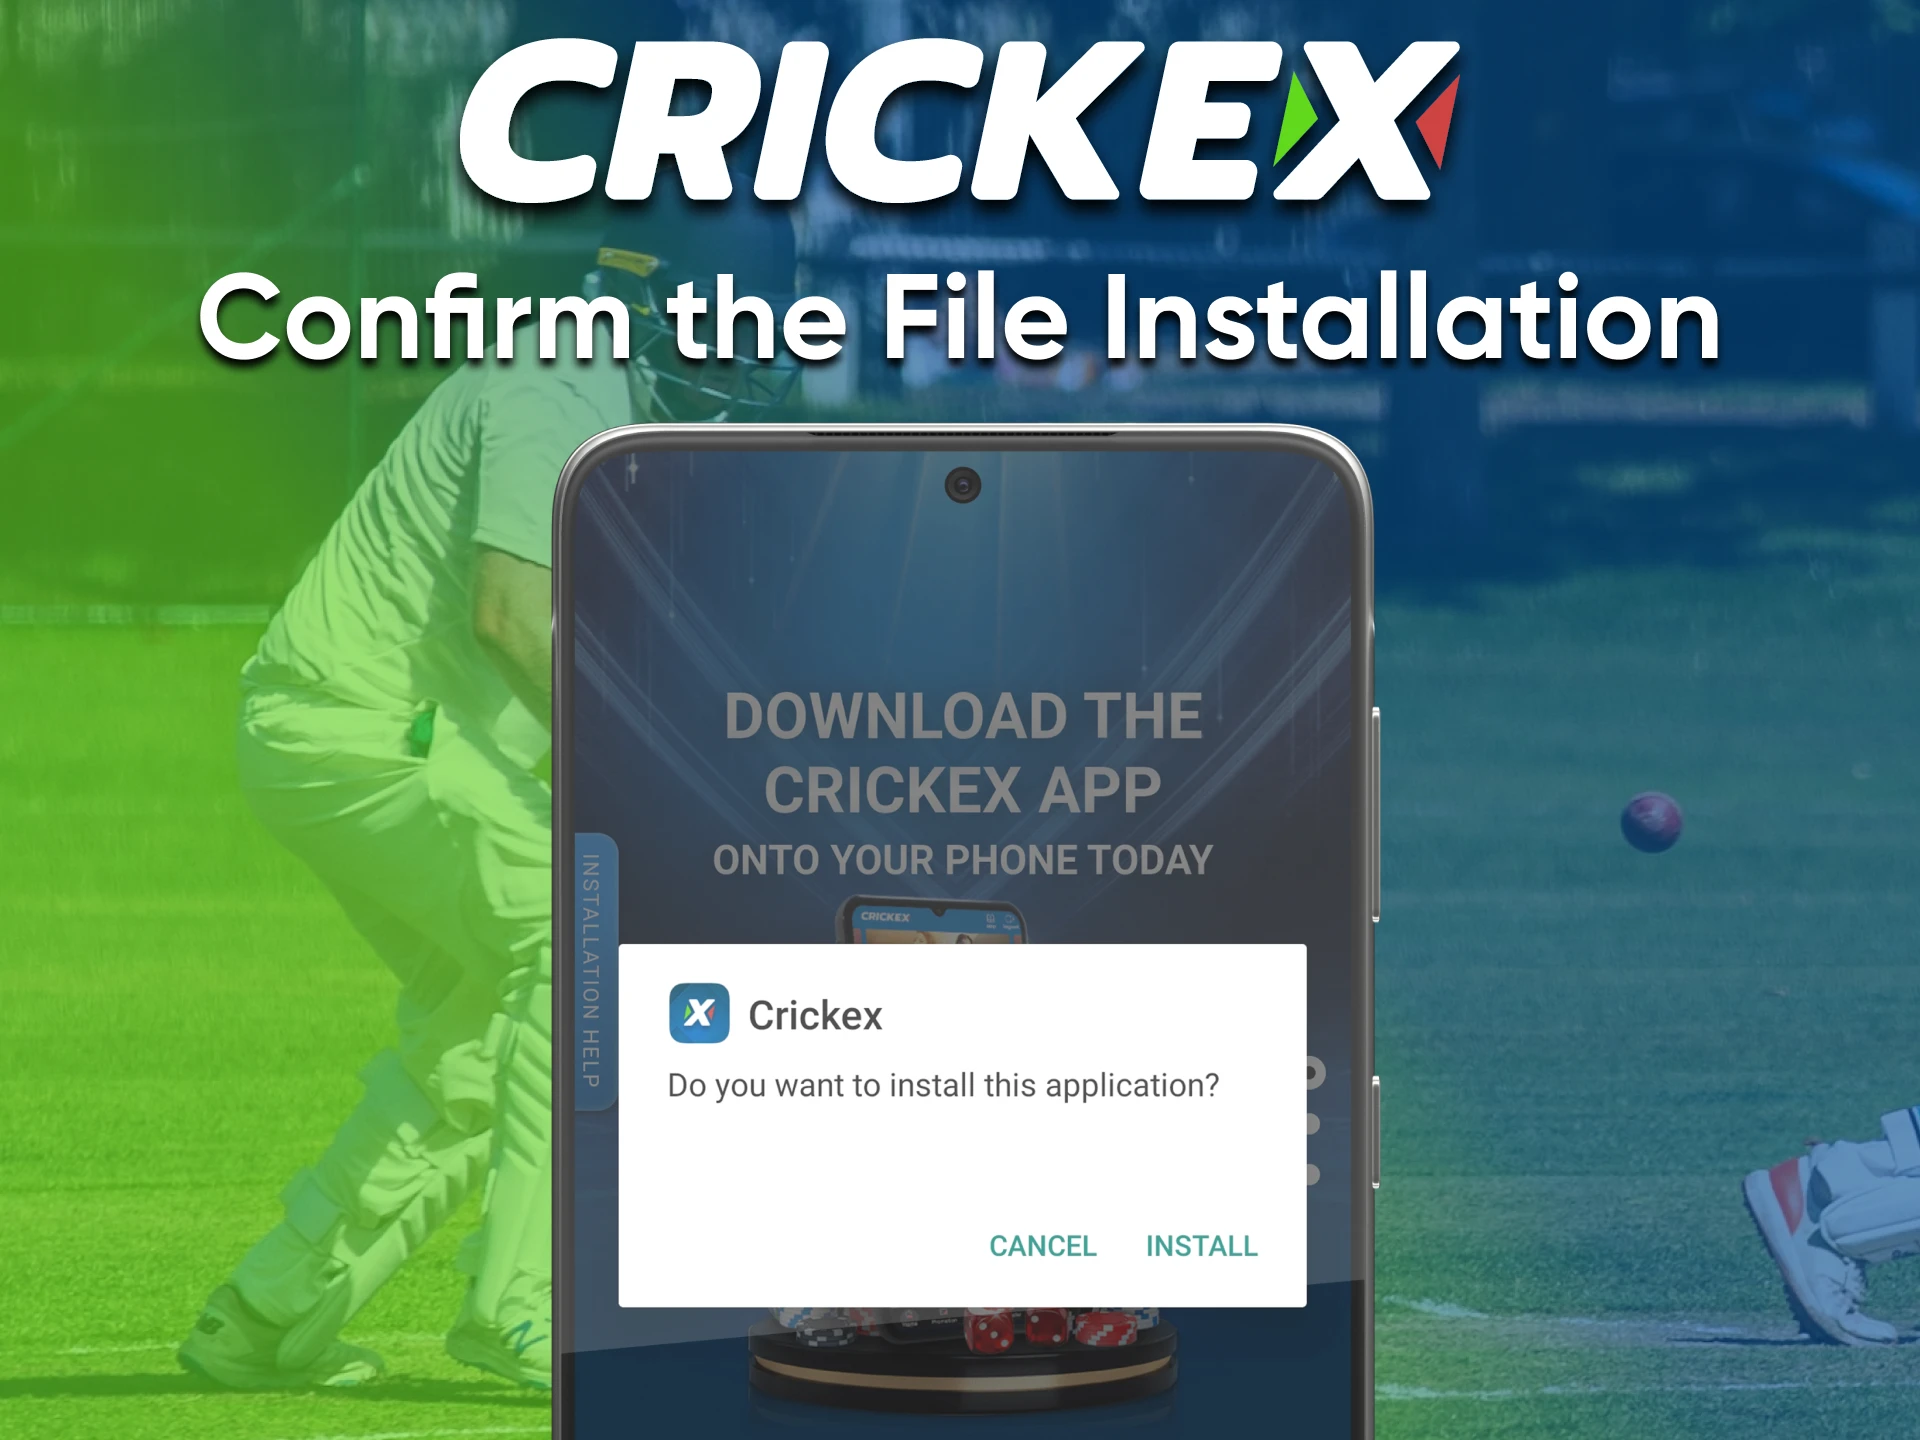 To start using Crickex, you need to install the application.